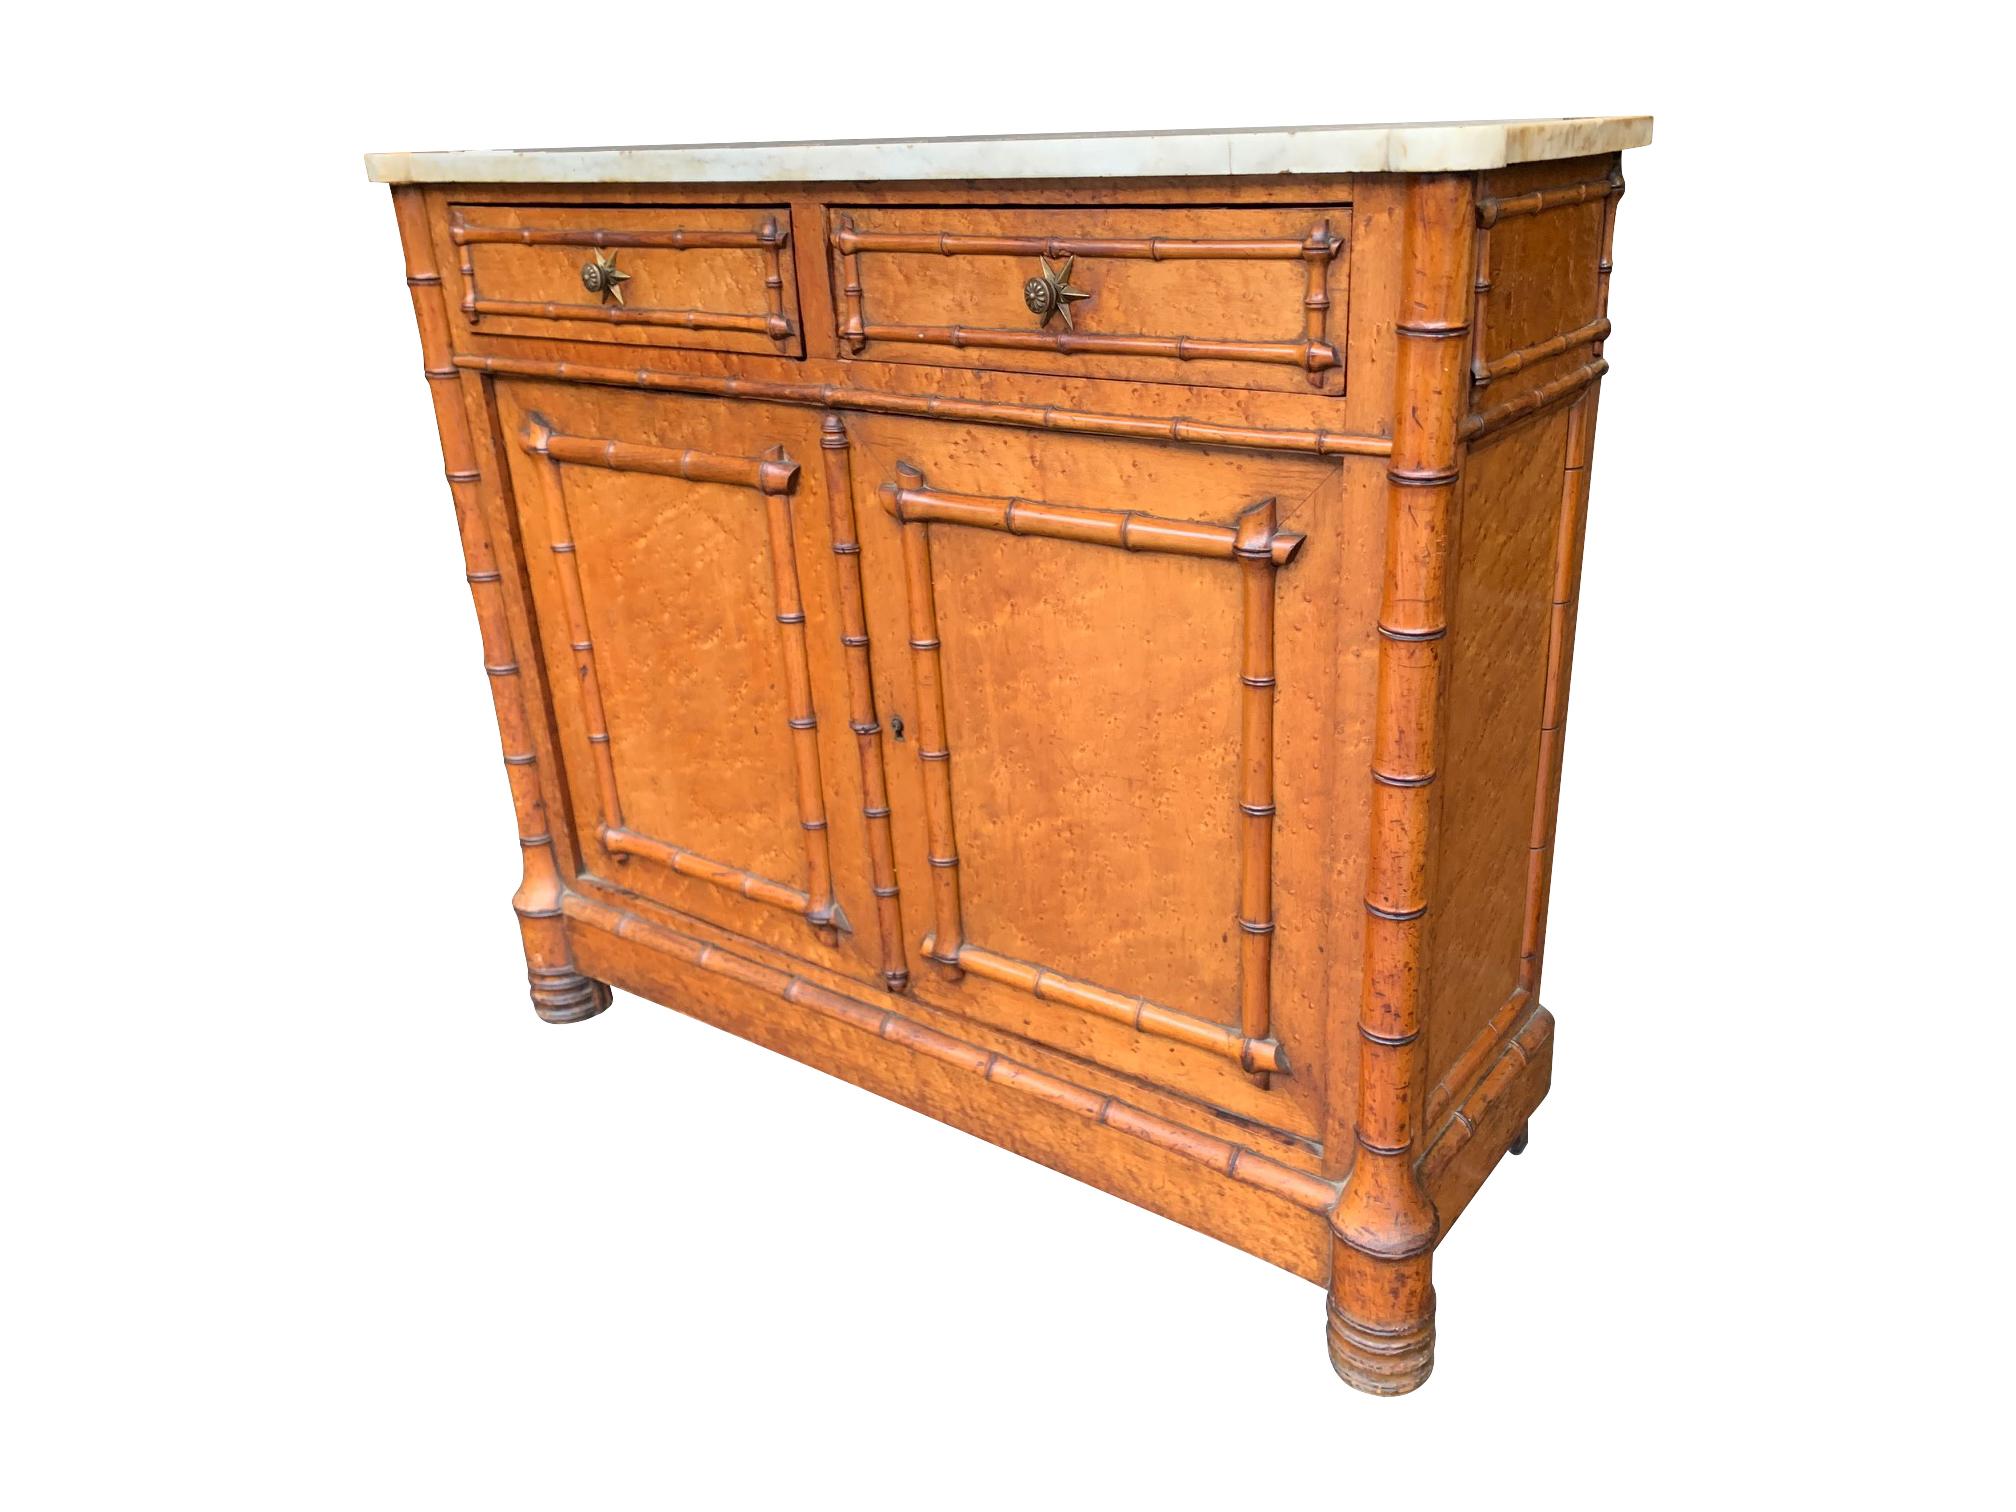 A lovely Victorian bird's-eye maple console cabinet with faux bamboo detail on the doors, corners and sides mounted with shaped white marble top. With two drawers with original brass star shaped knobs and twin lower cupboards.